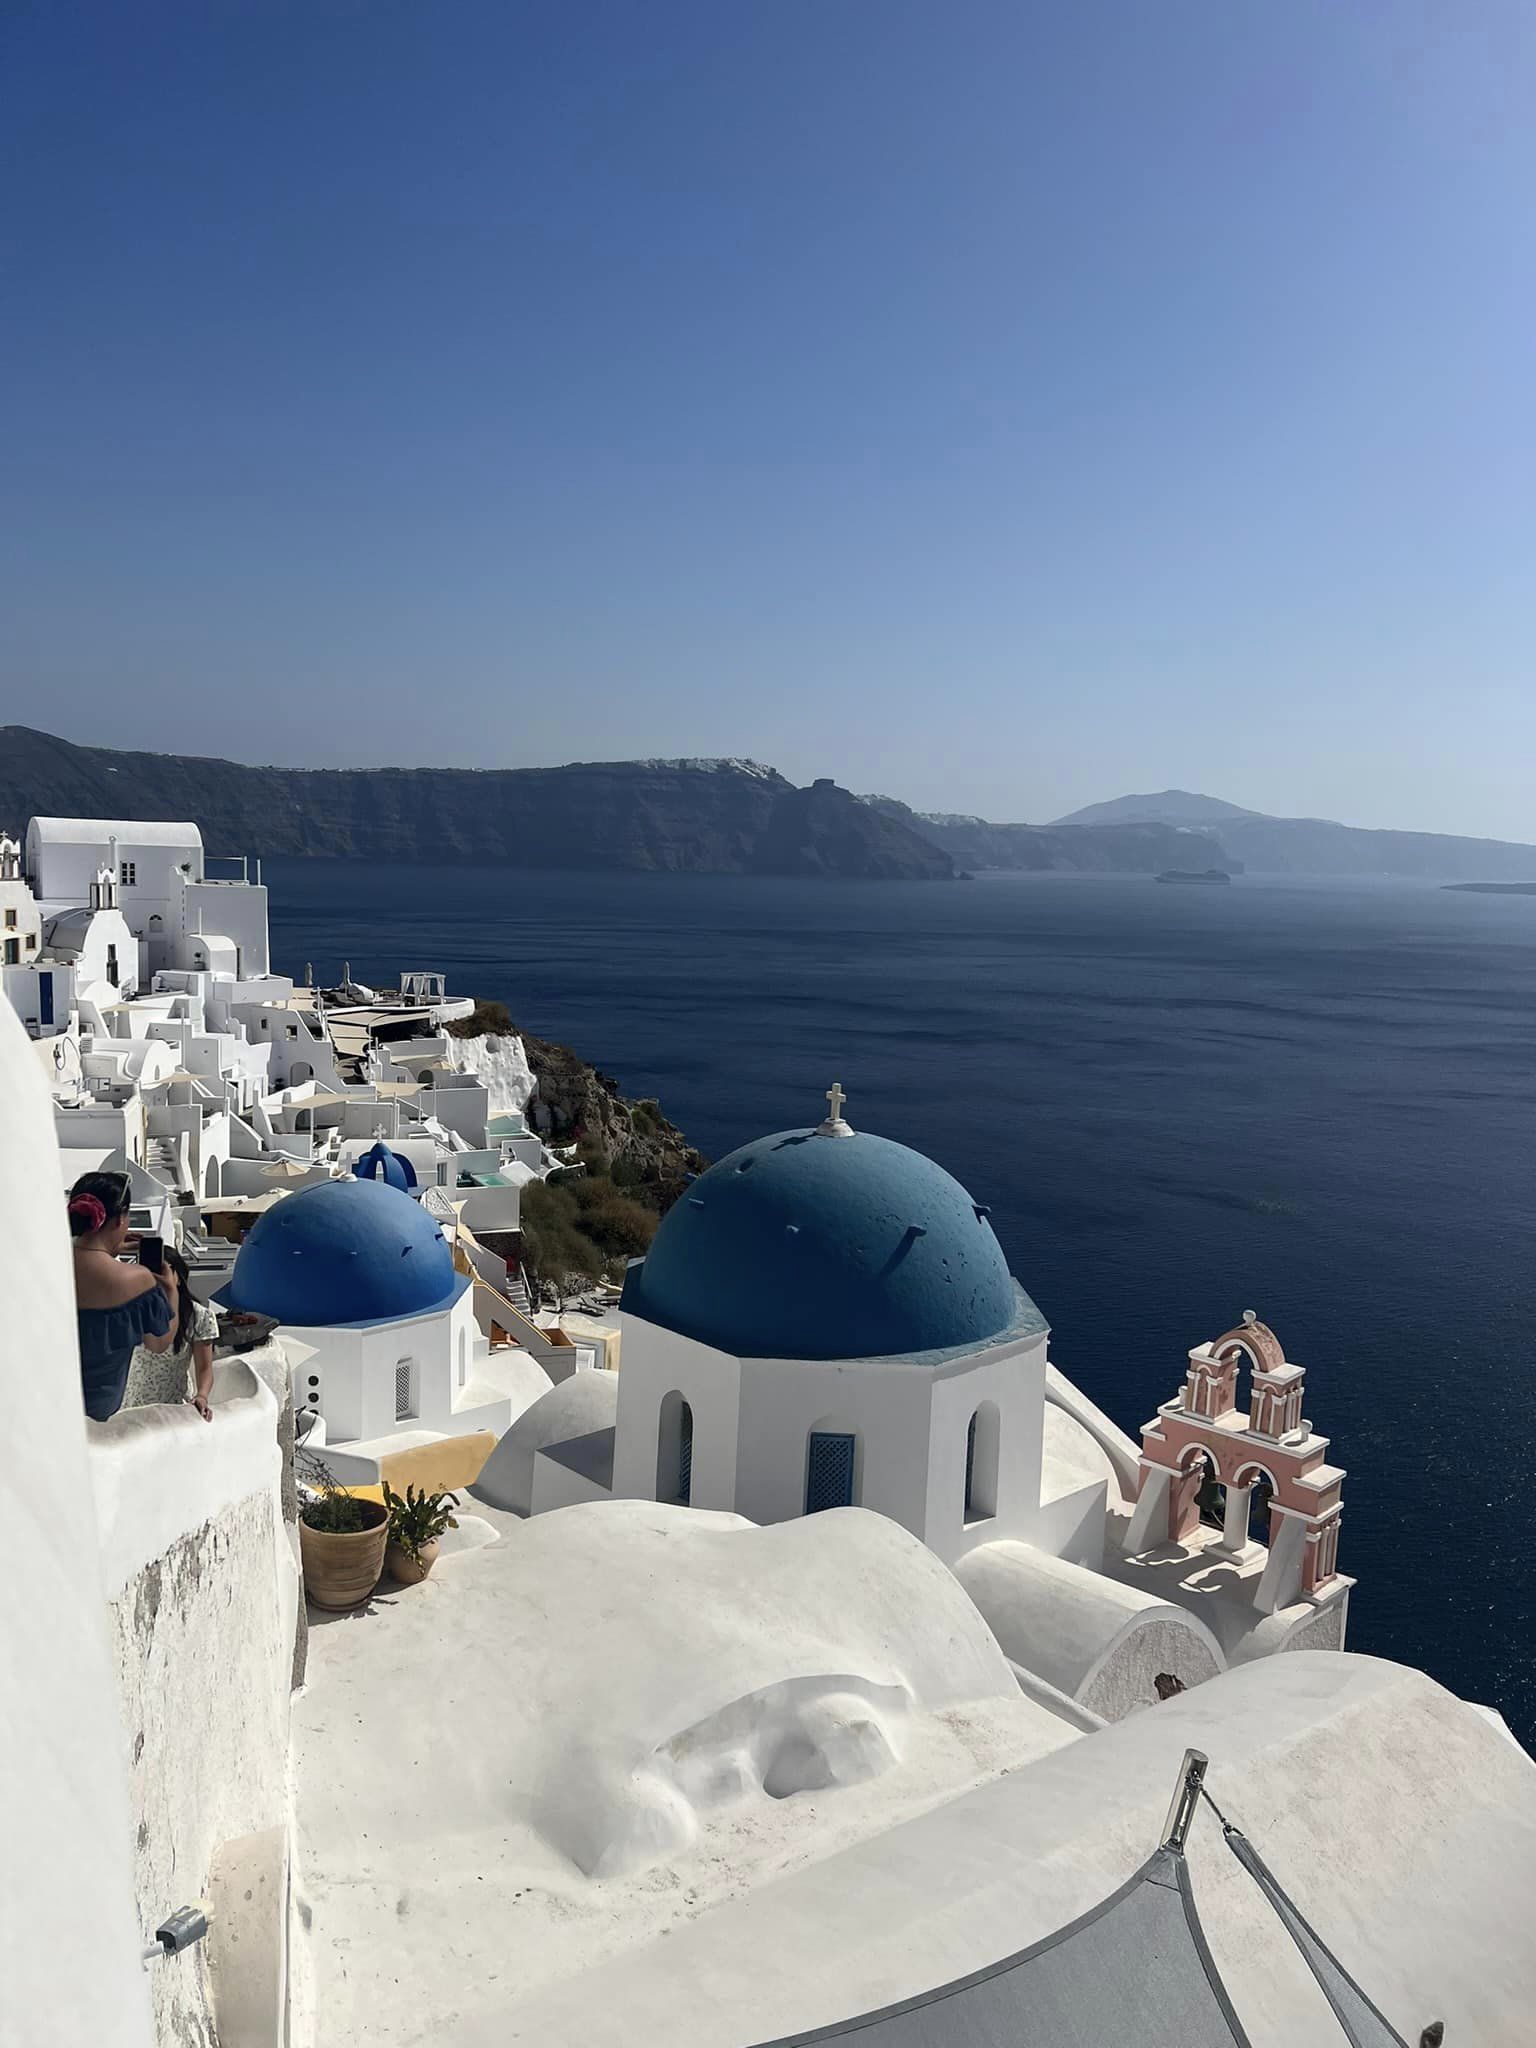 They even managed to visit some countries close to the Mediterranean, such as Greece. Image credit: Hirza Hasniza